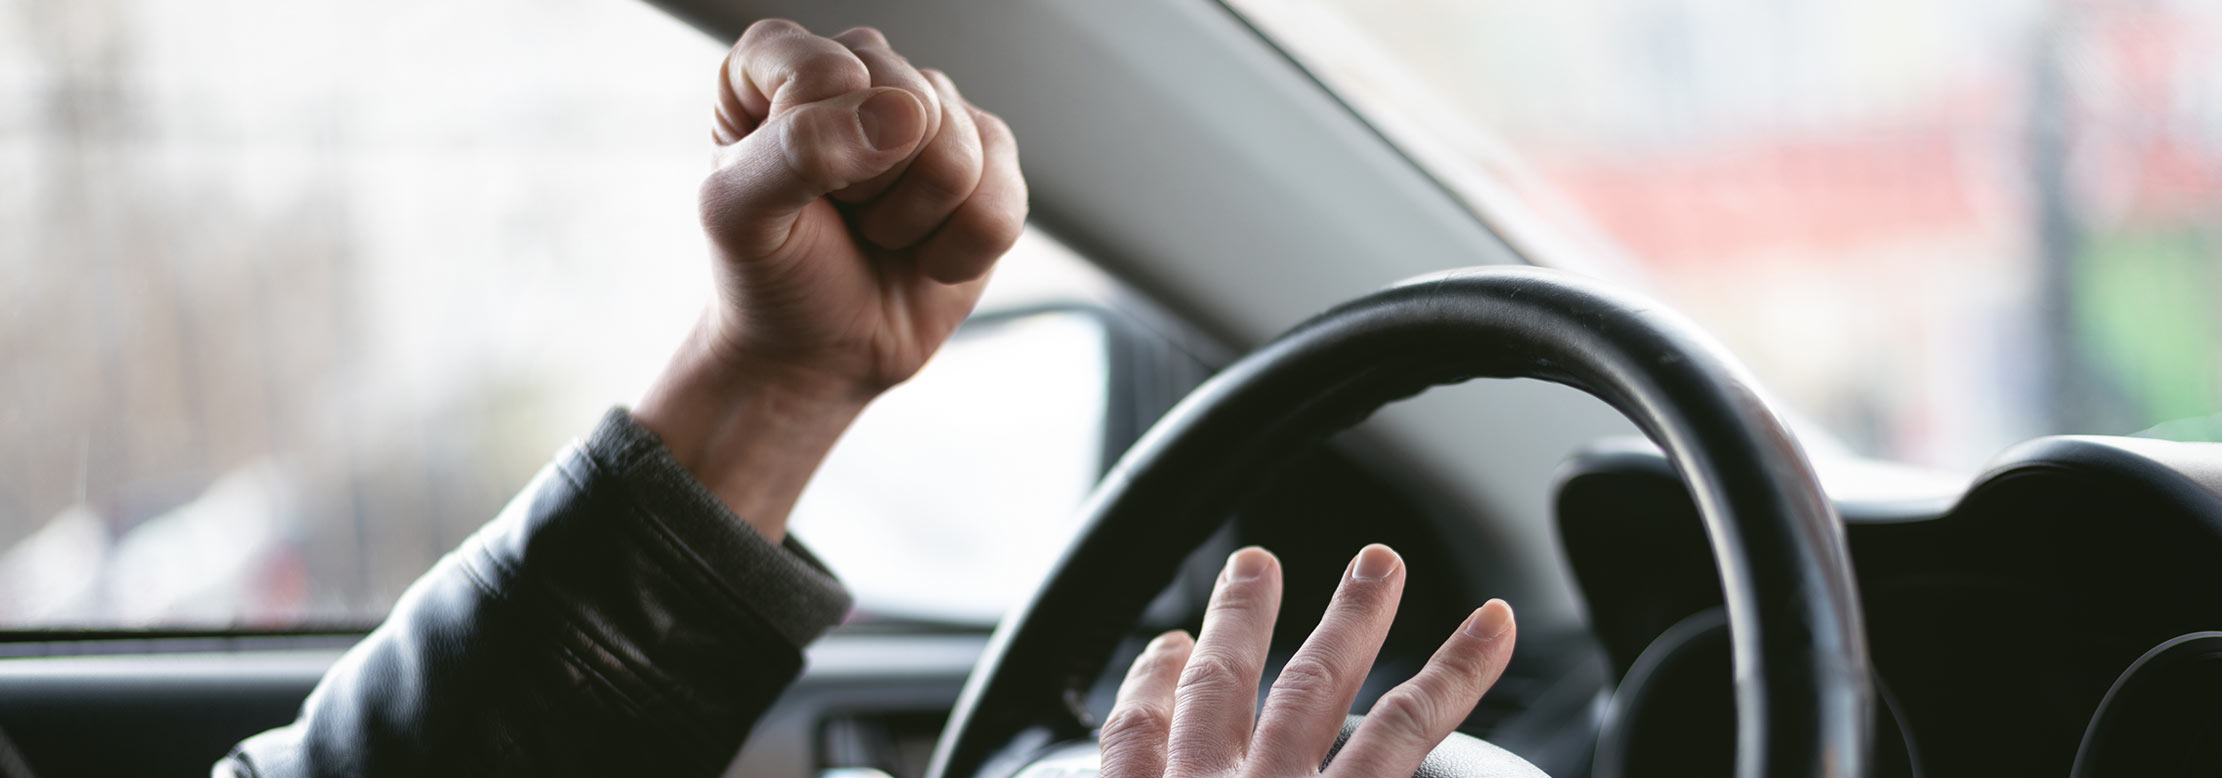 Aggressive driver pumps fist with anger behind the wheel. 